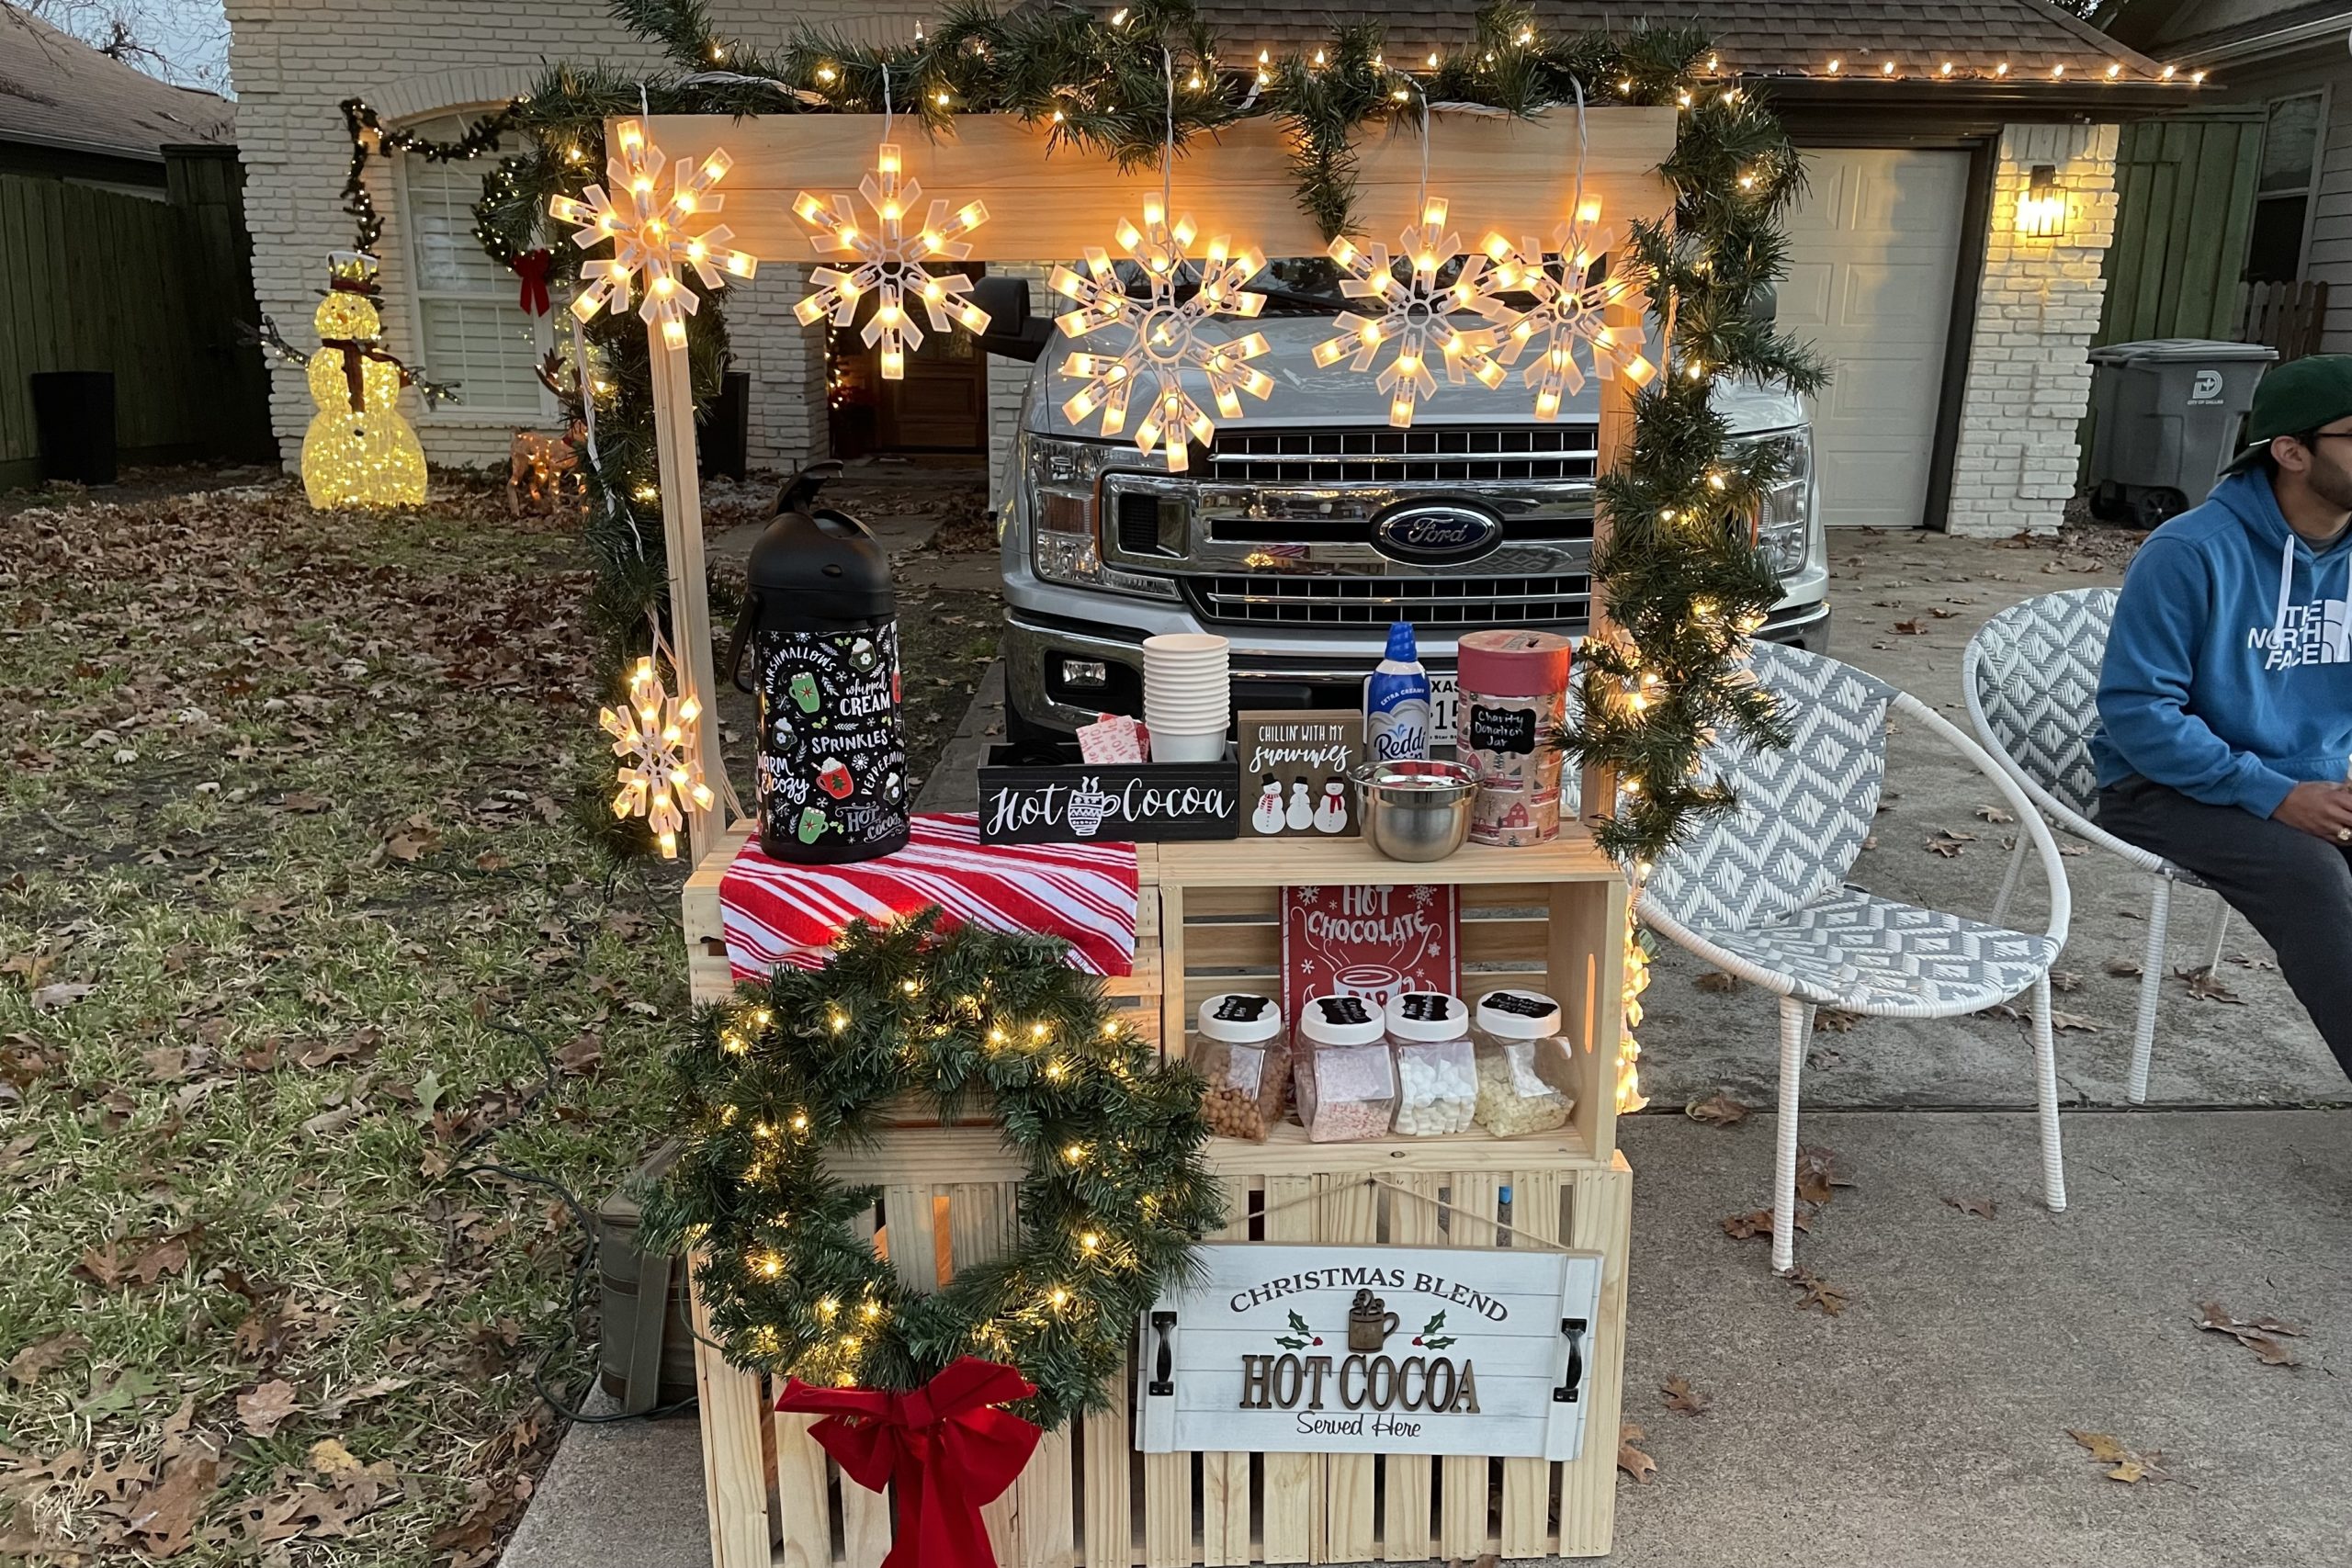 Prospect Avenue residents spread warmth with hot cocoa stand -  Lakewood/East Dallas